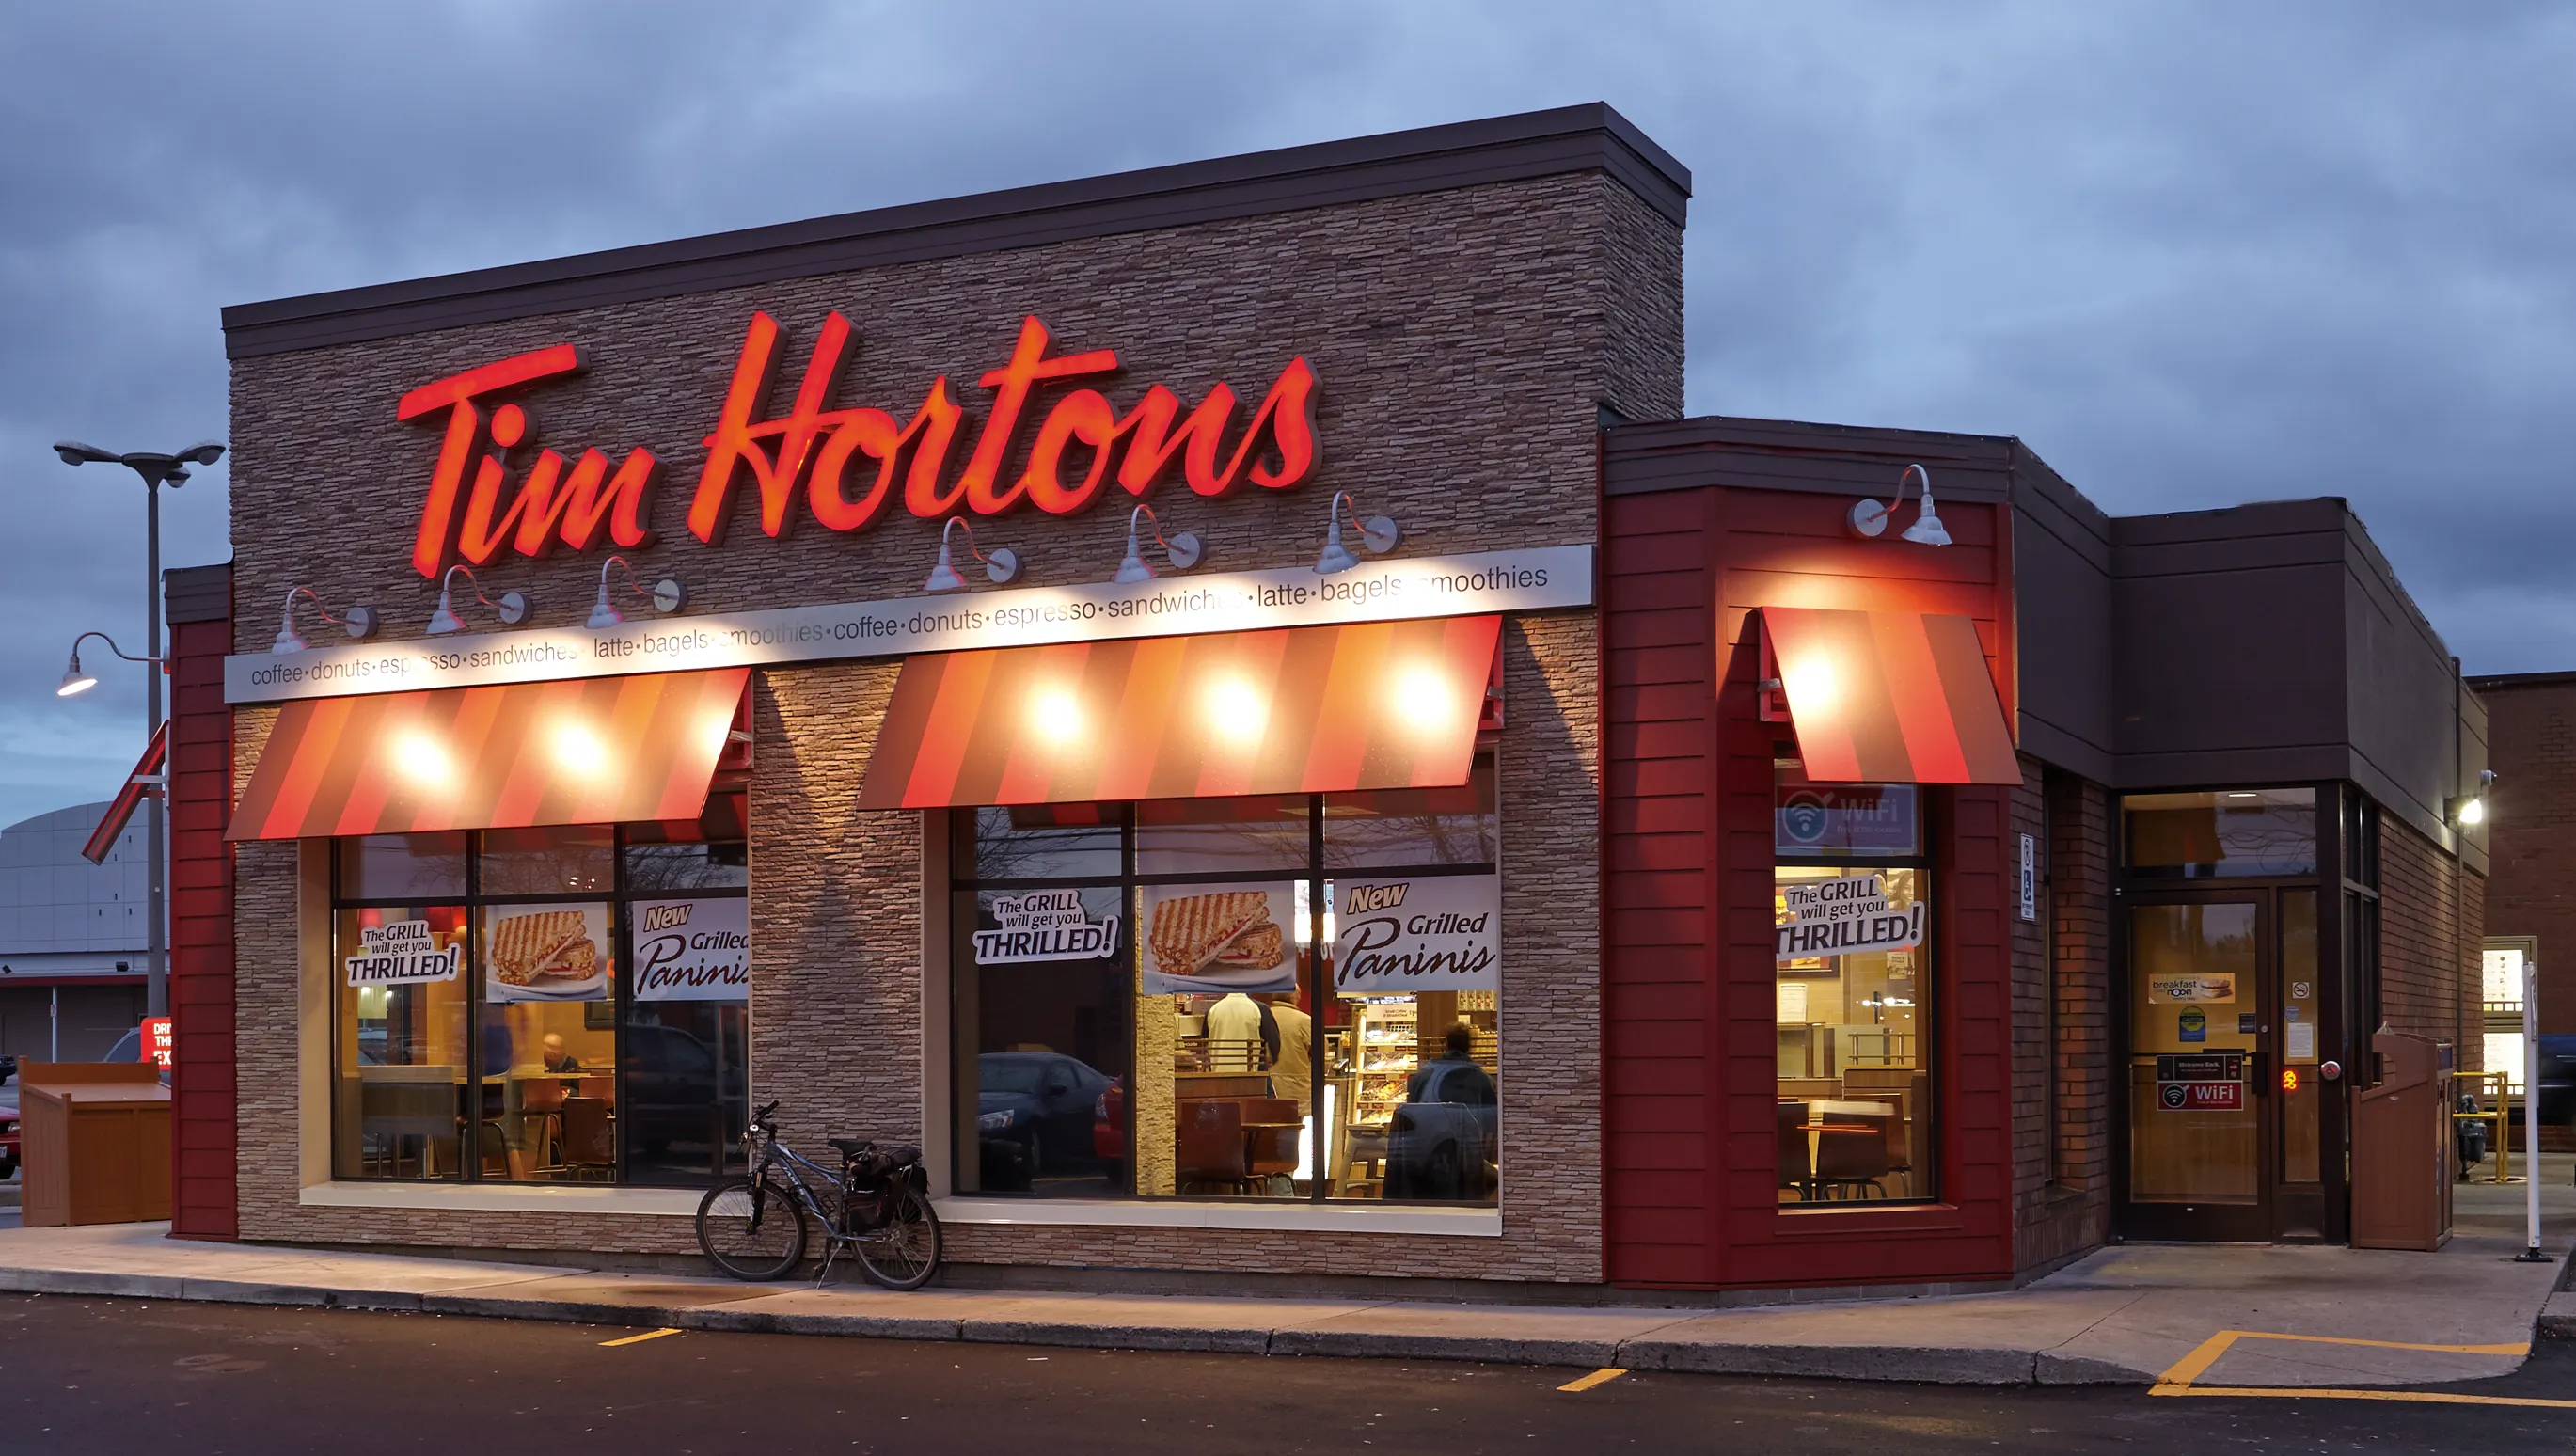 The famous Canadian fast-food chain, Tim Hortons, is coming to Pakistan with plans of opening multiple outlets across the country.